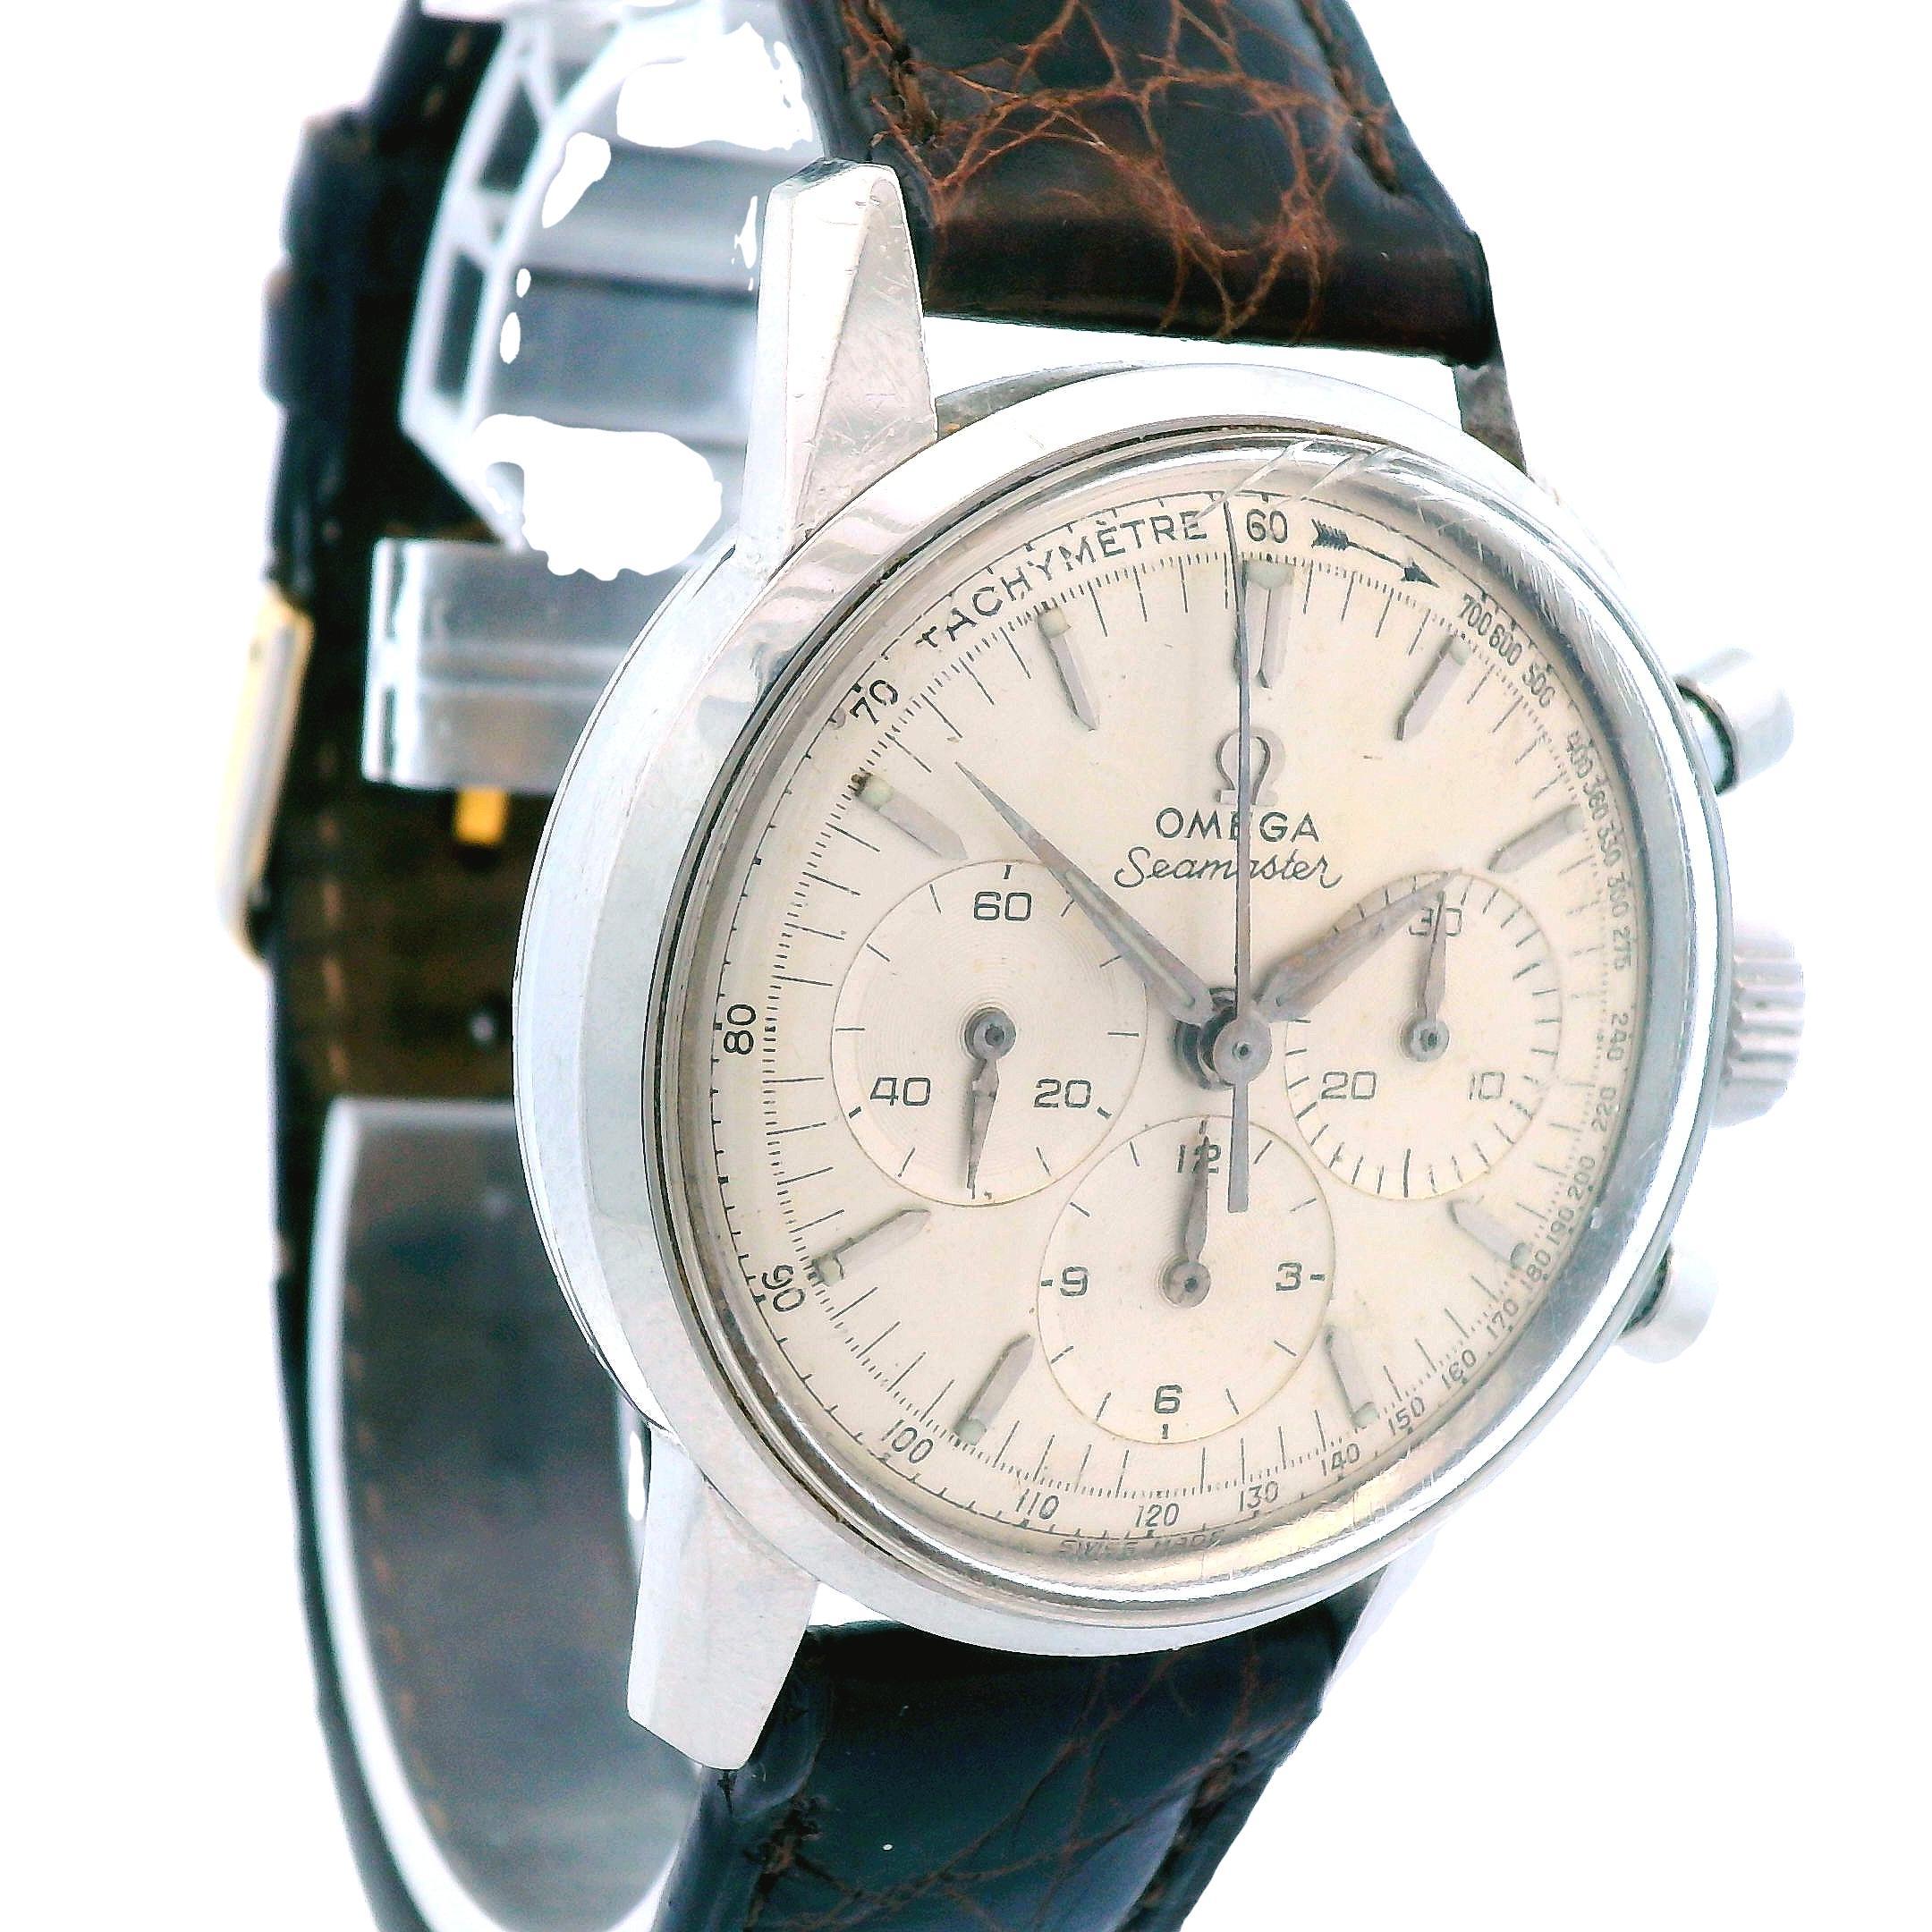 This is a vintage Omega Seamaster chronograph from the 1960s in running condition. This chronograph watch is made in stainless steel and comes with a beautiful leather strap. The watch is fully genuine Omega stamped with the traditional 'Seamaster'